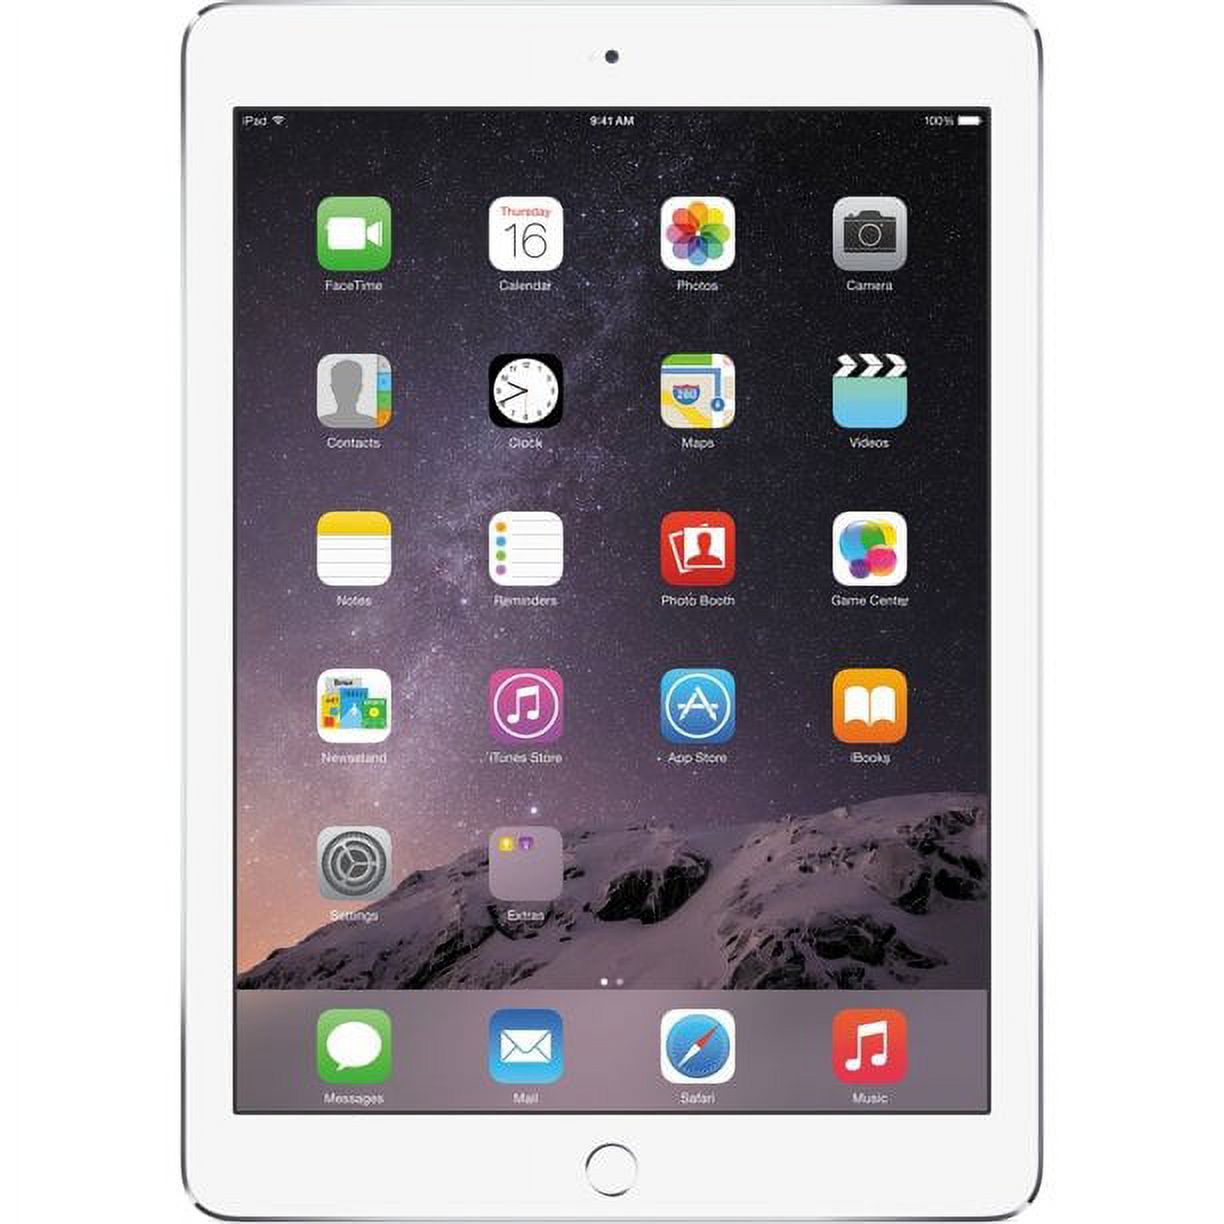 Restored Apple iPad Air 2 WiFi Only 16GB - Silver (Refurbished) - image 3 of 4